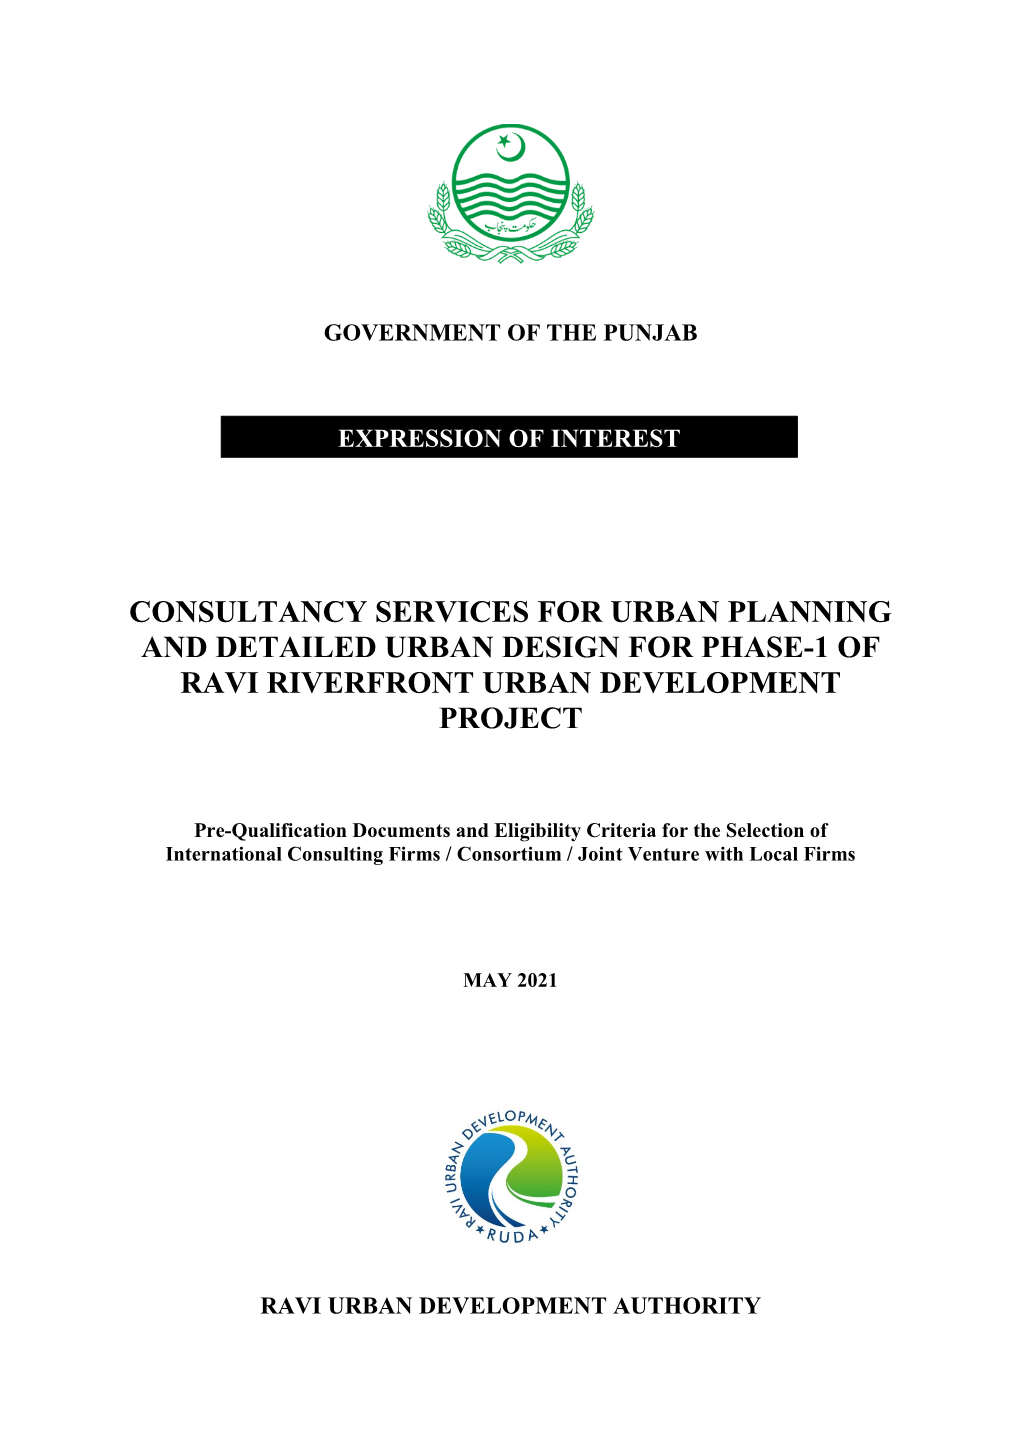 Consultancy Services for Urban Planning and Detailed Urban Design for Phase-1 of Ravi Riverfront Urban Development Project